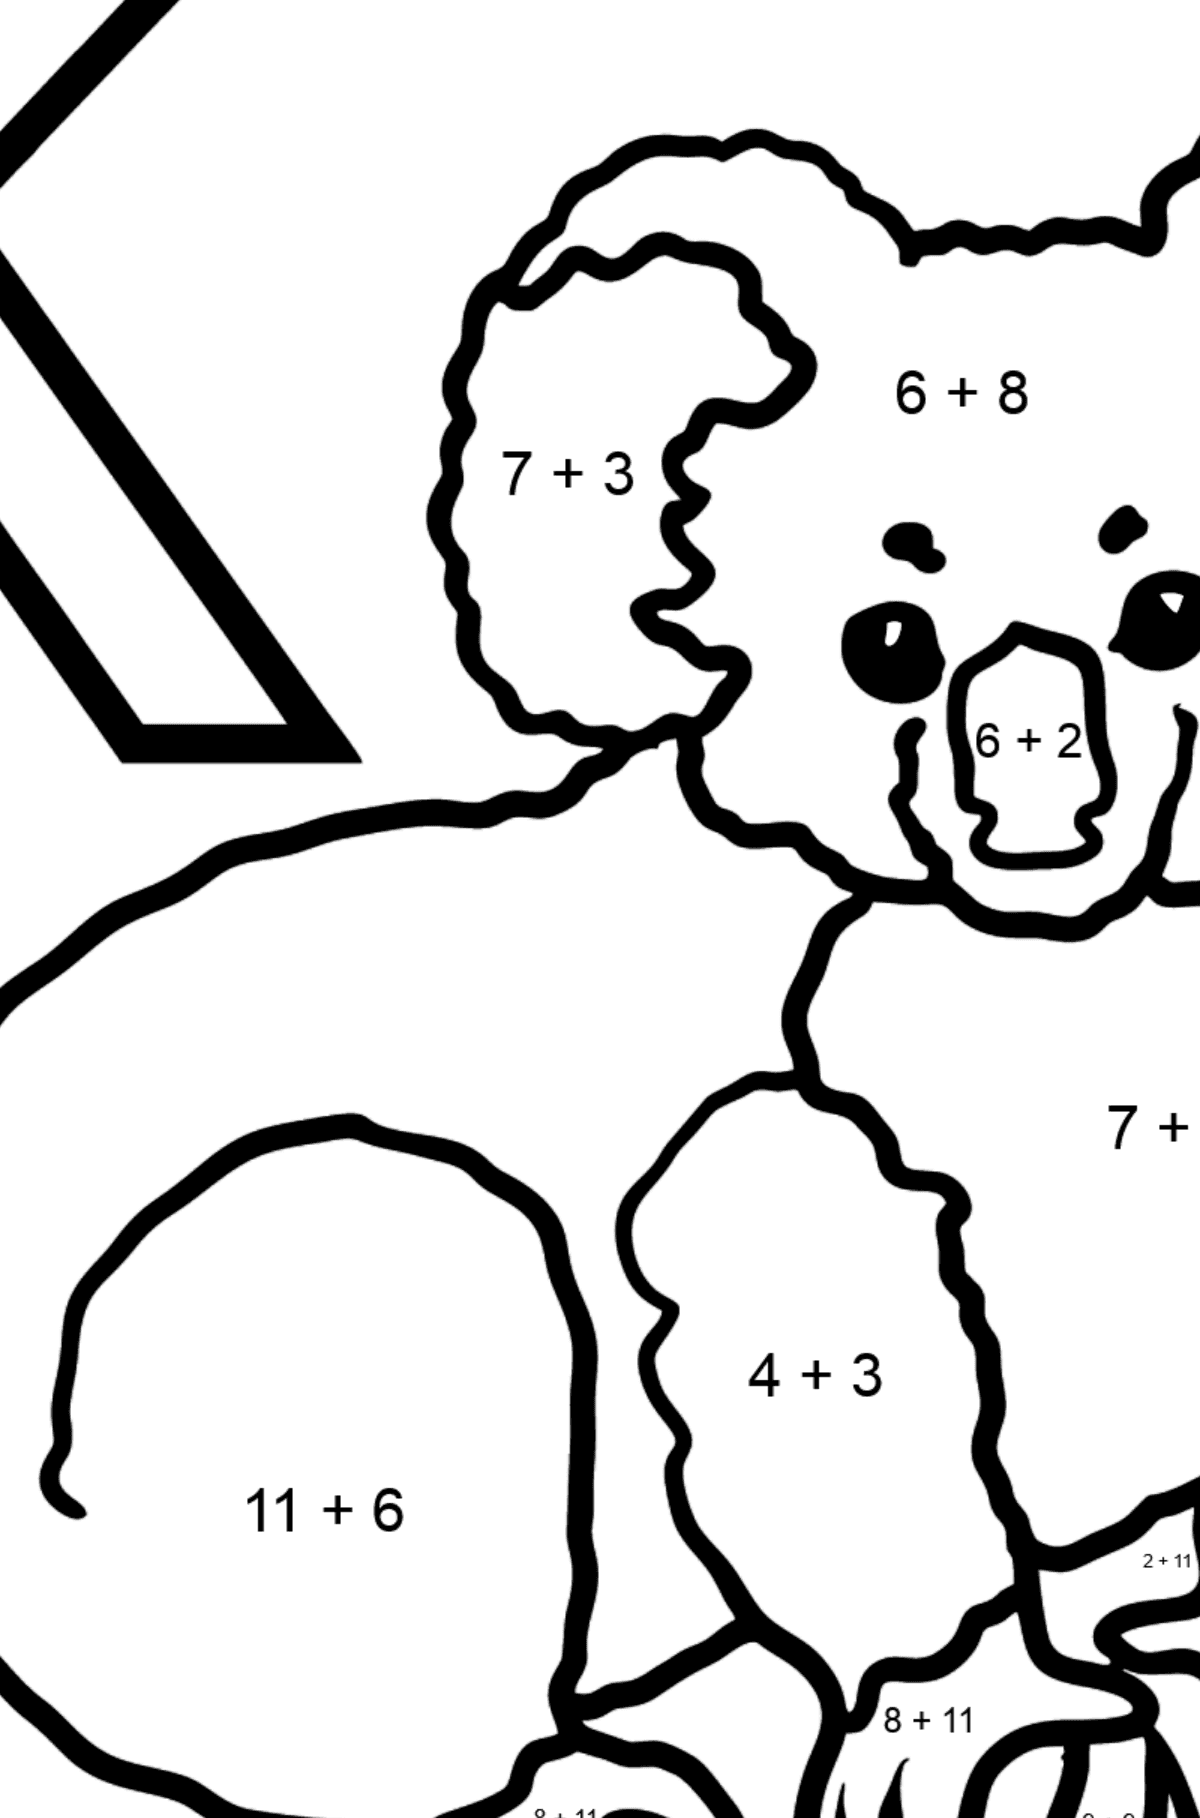 Spanish Letter K coloring pages - KOALA - Math Coloring - Addition for Kids